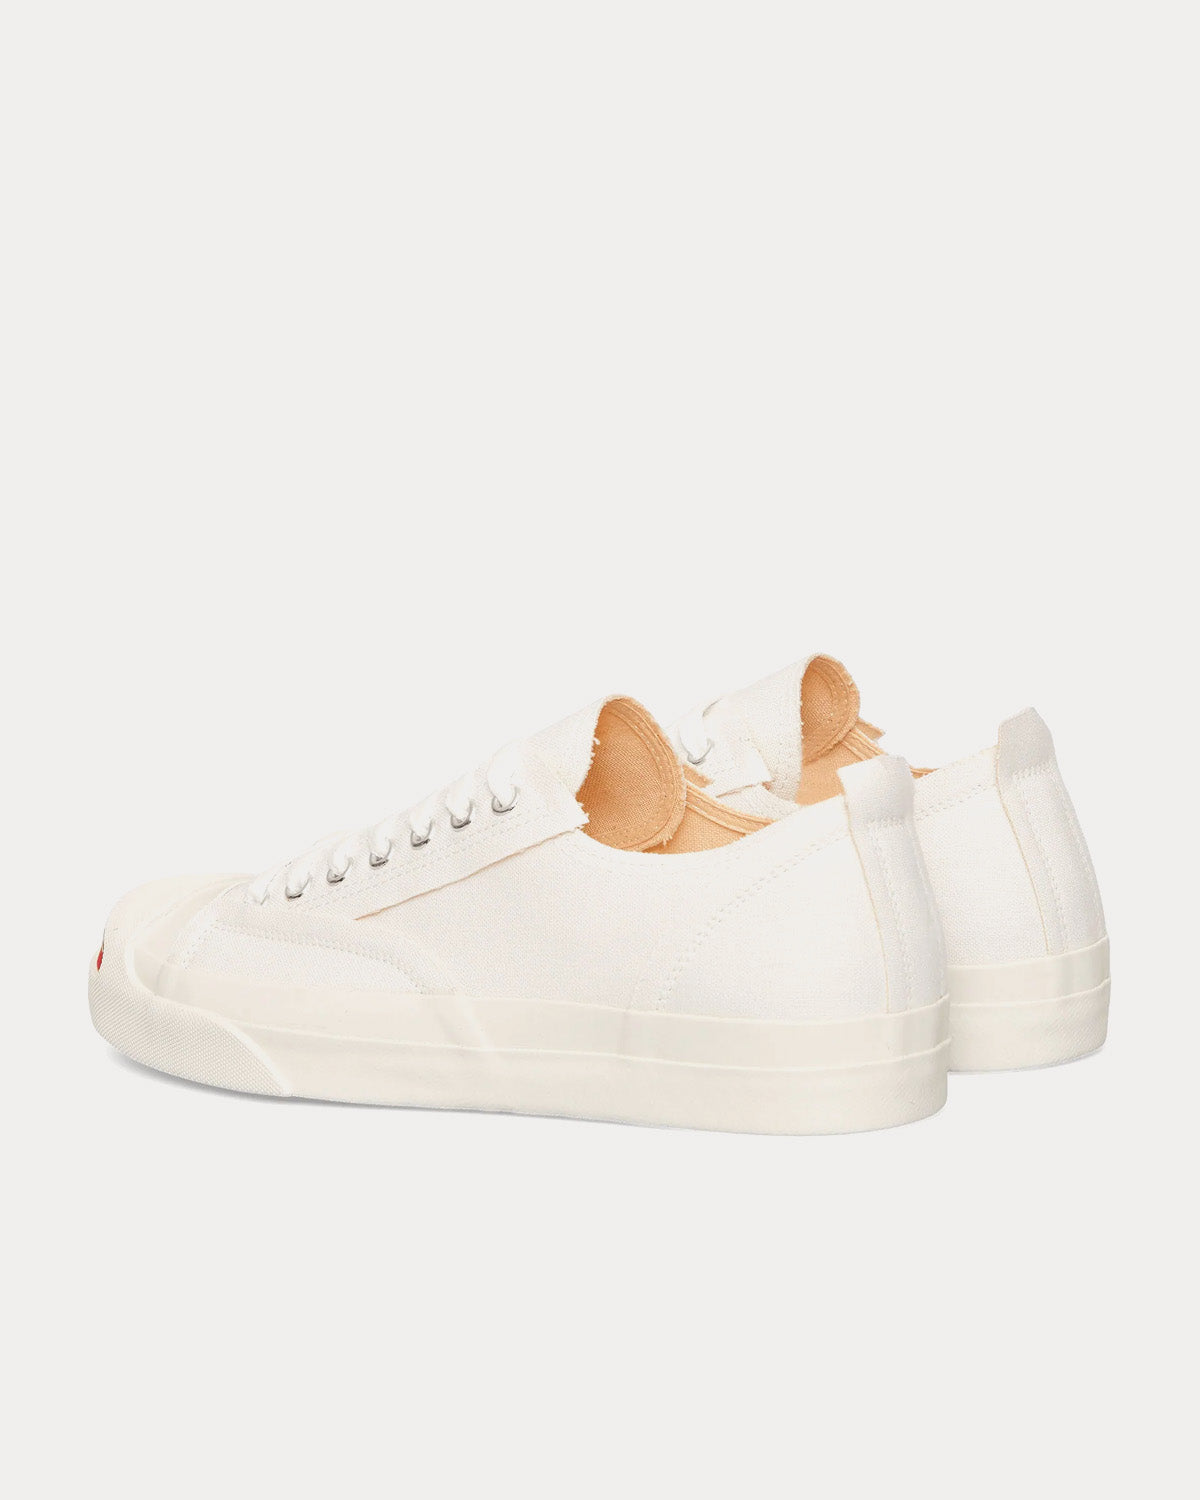 Undercover - Canvas White Low Top Sneakers